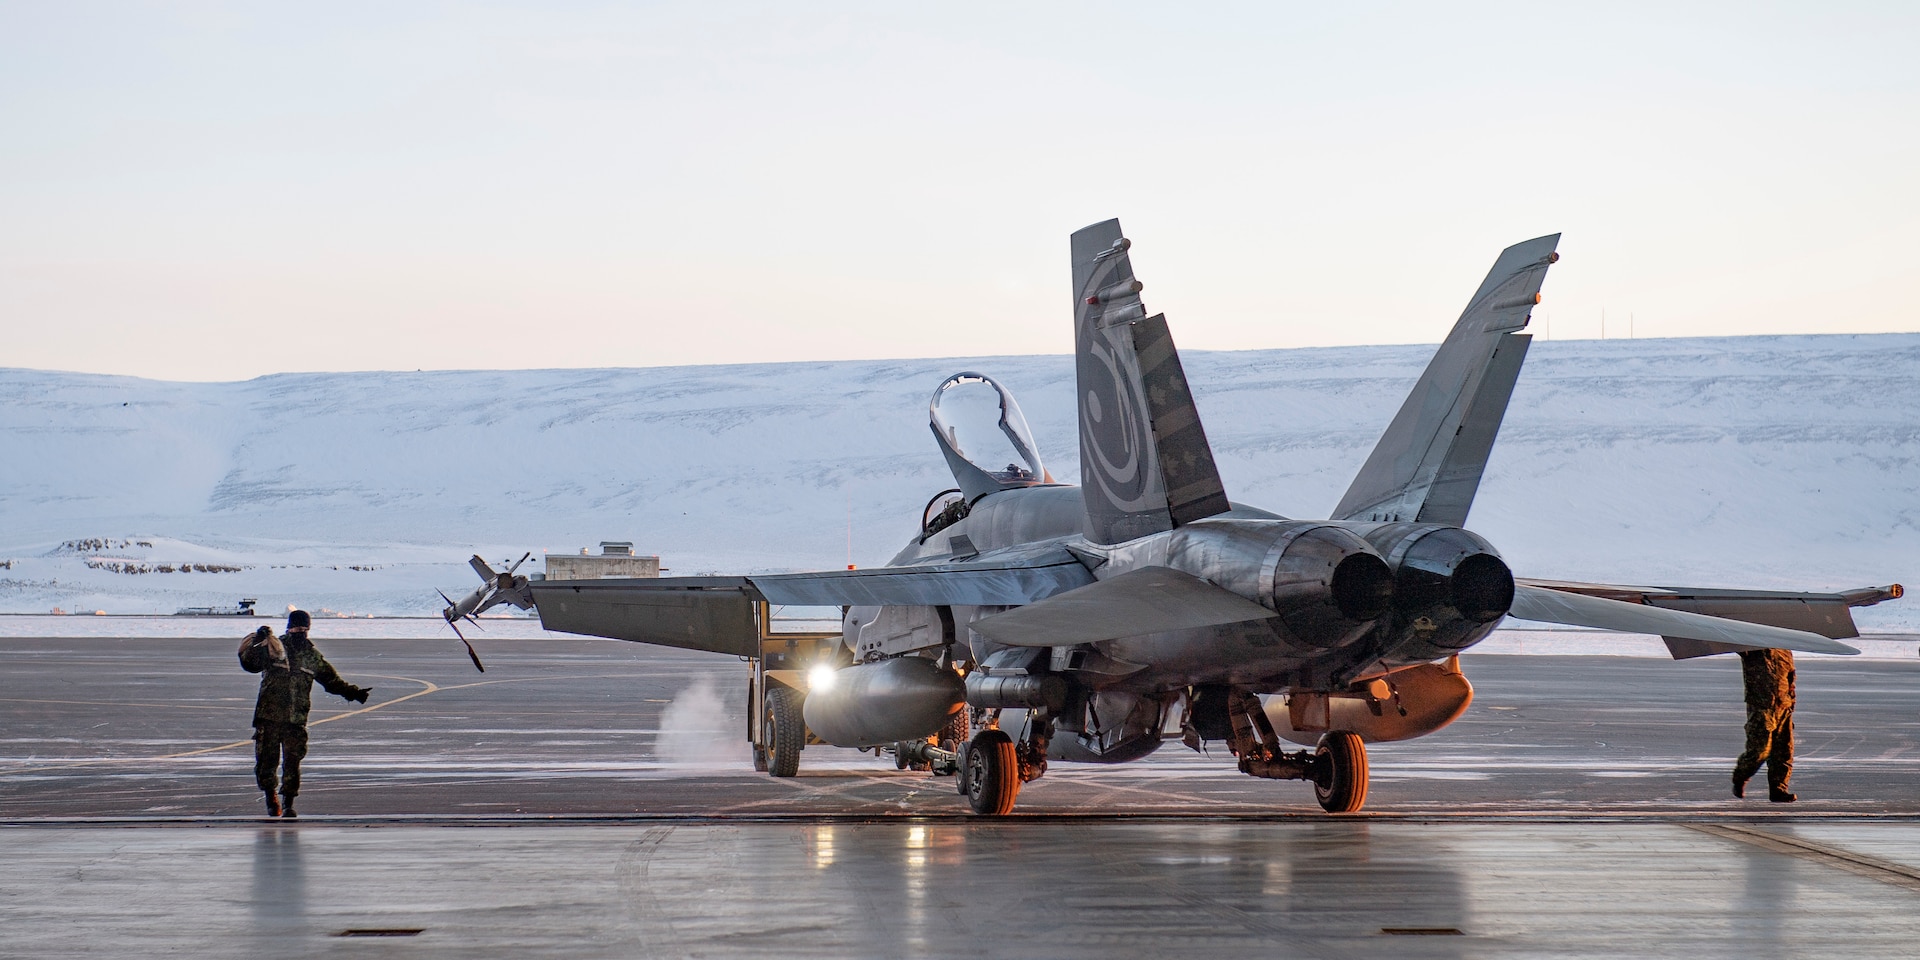 A servicemember guides a Royal Canadian Air Force CF-18 Hornet into the hangar upon arrival at Thule Air Base, Greenland, for Operation NOBLE DEFENDER, March 14, 2022.